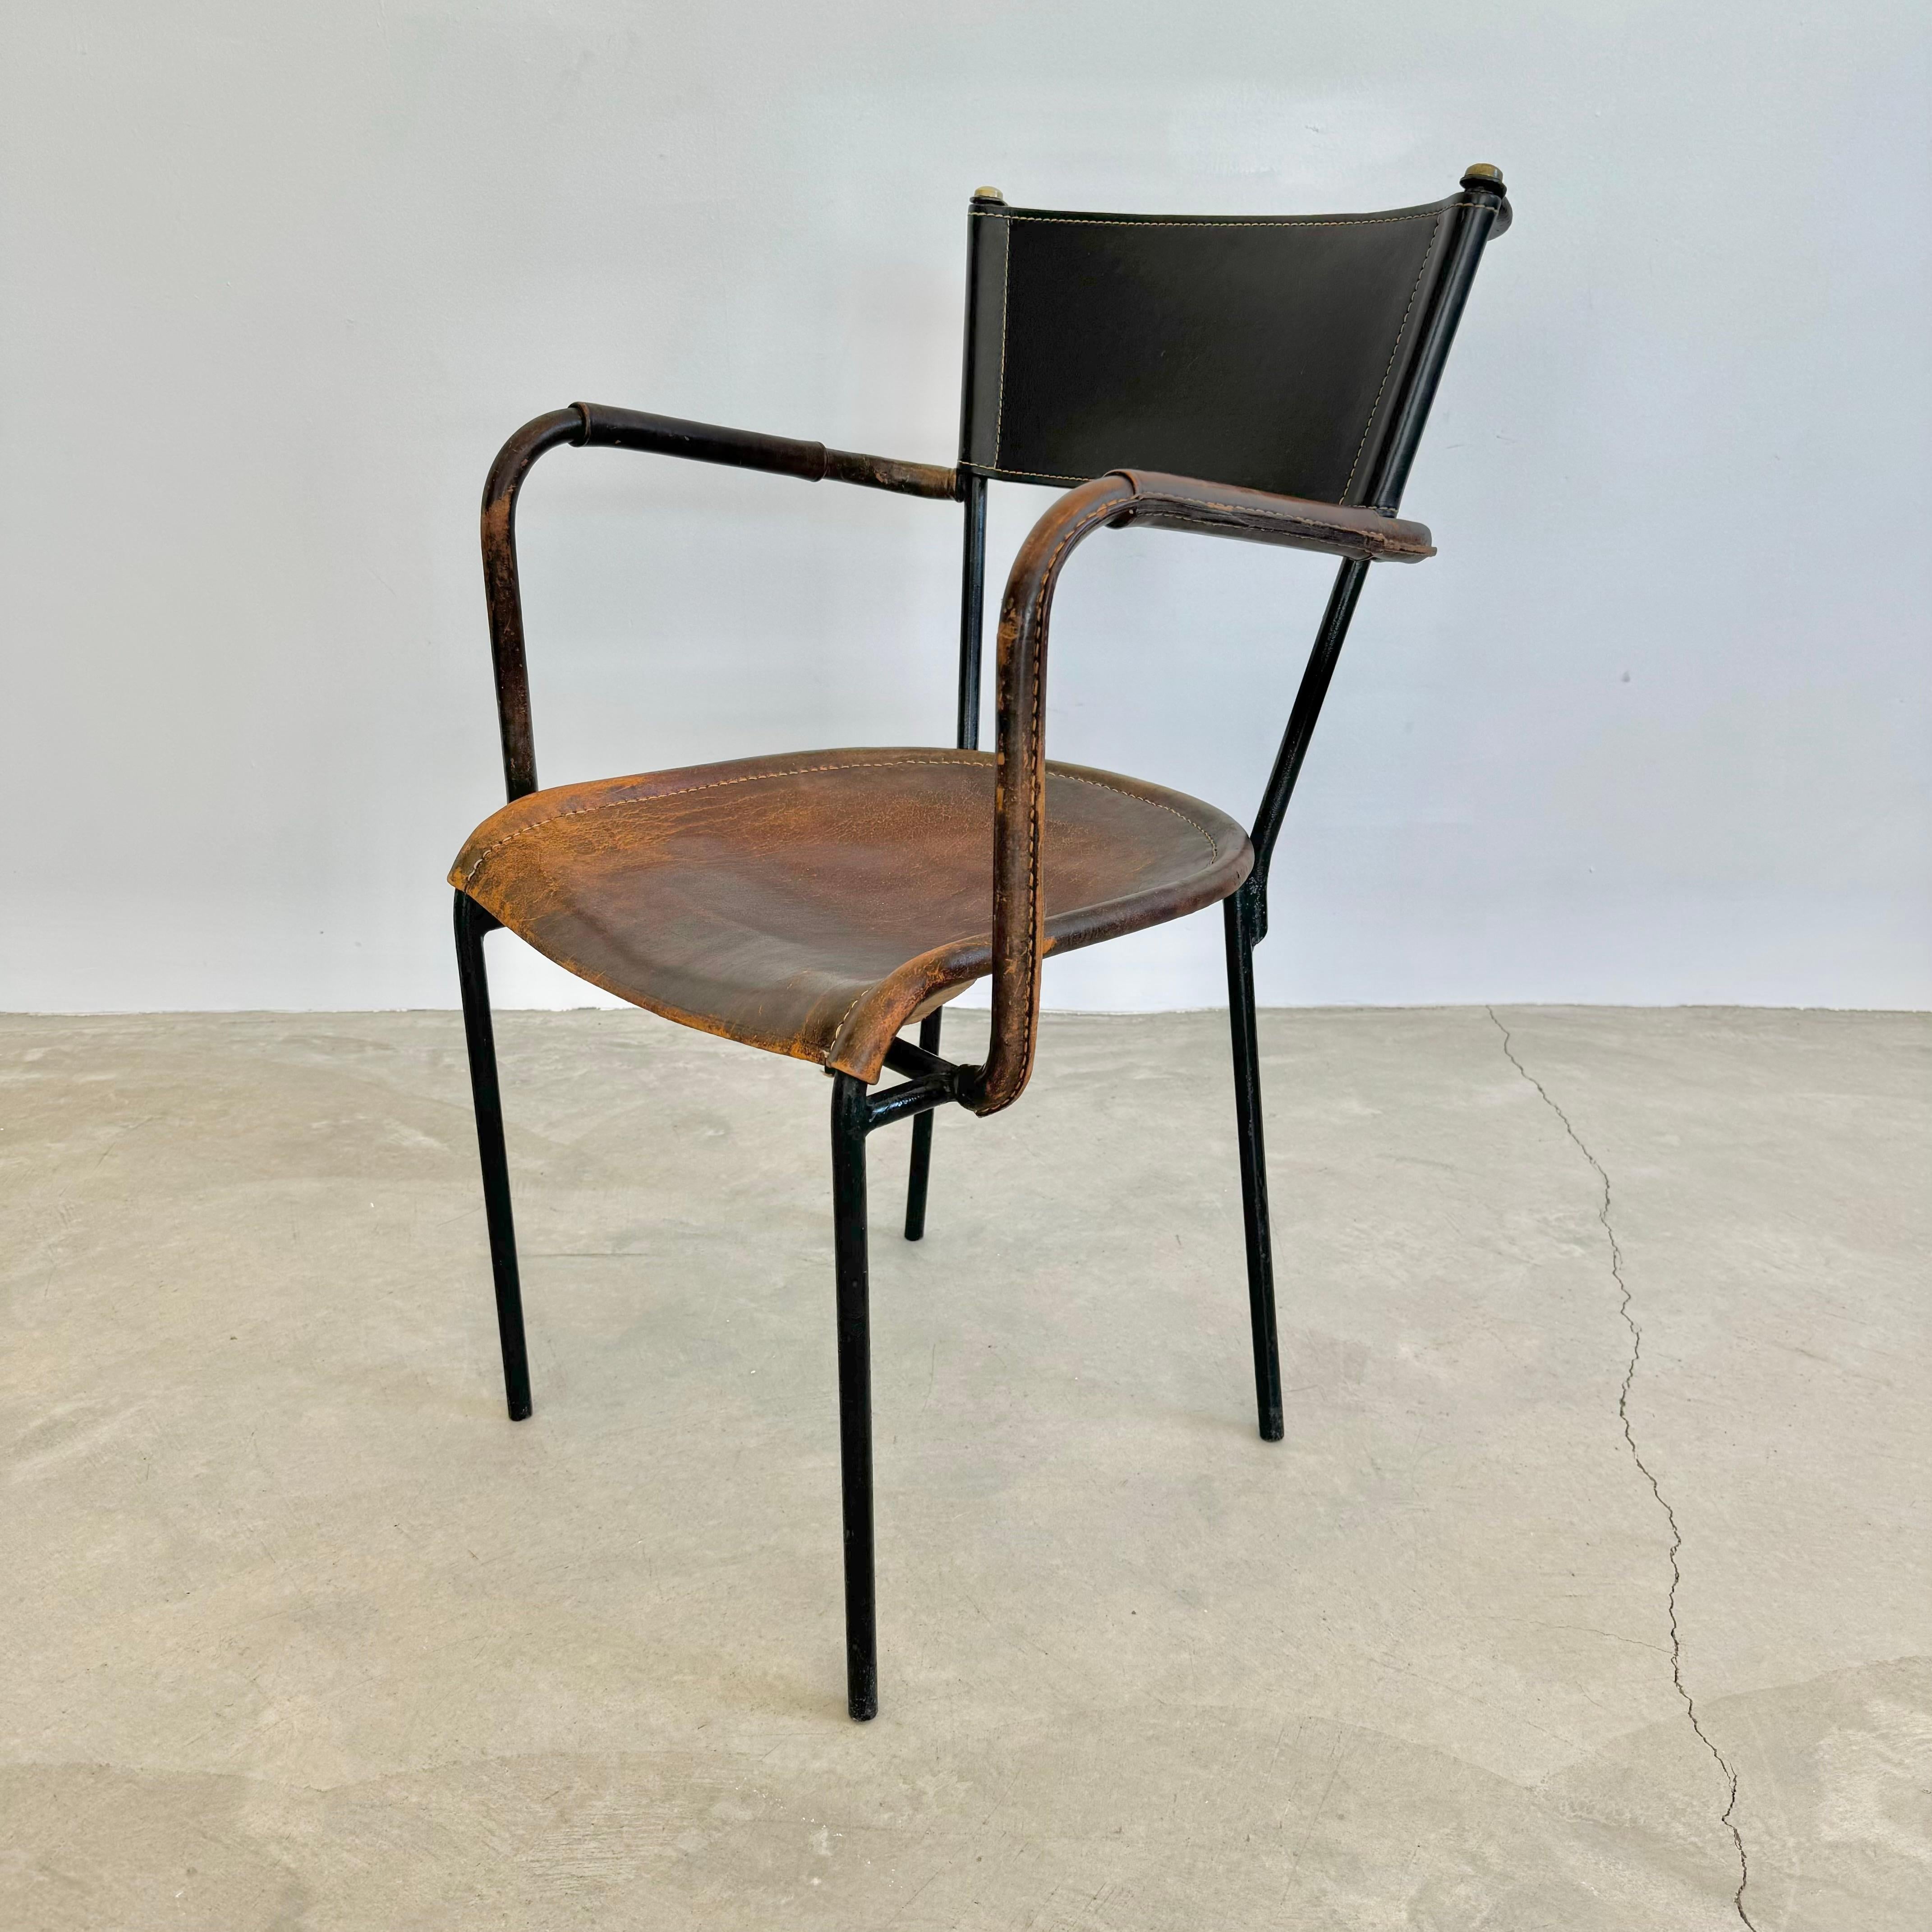 Jacques Adnet Sculptural Leather Armchair, 1950s France For Sale 10